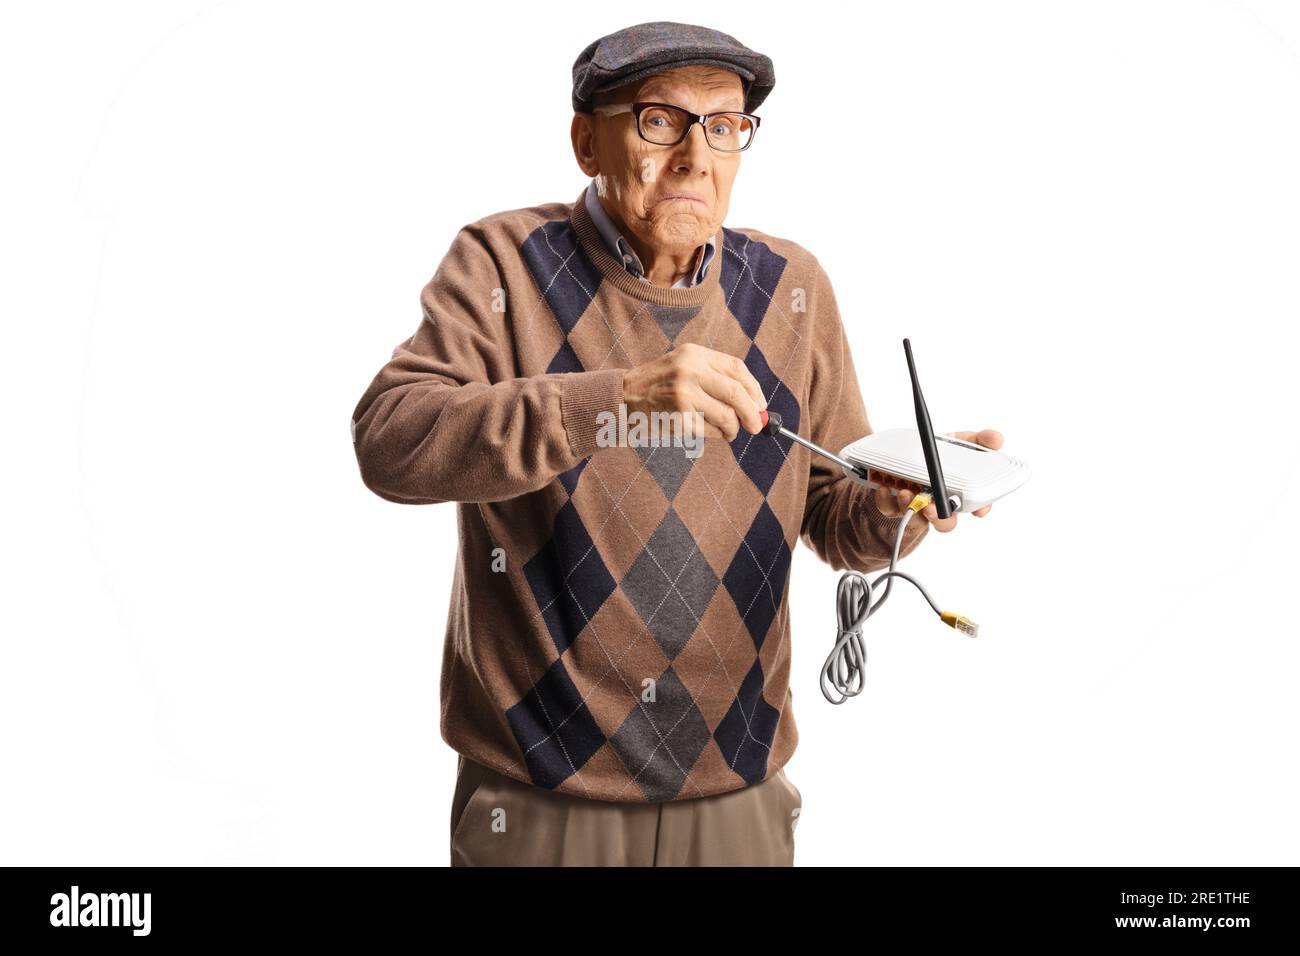 Funny old man trying to fix router with a screwdriver isolated on white background Stock Photo